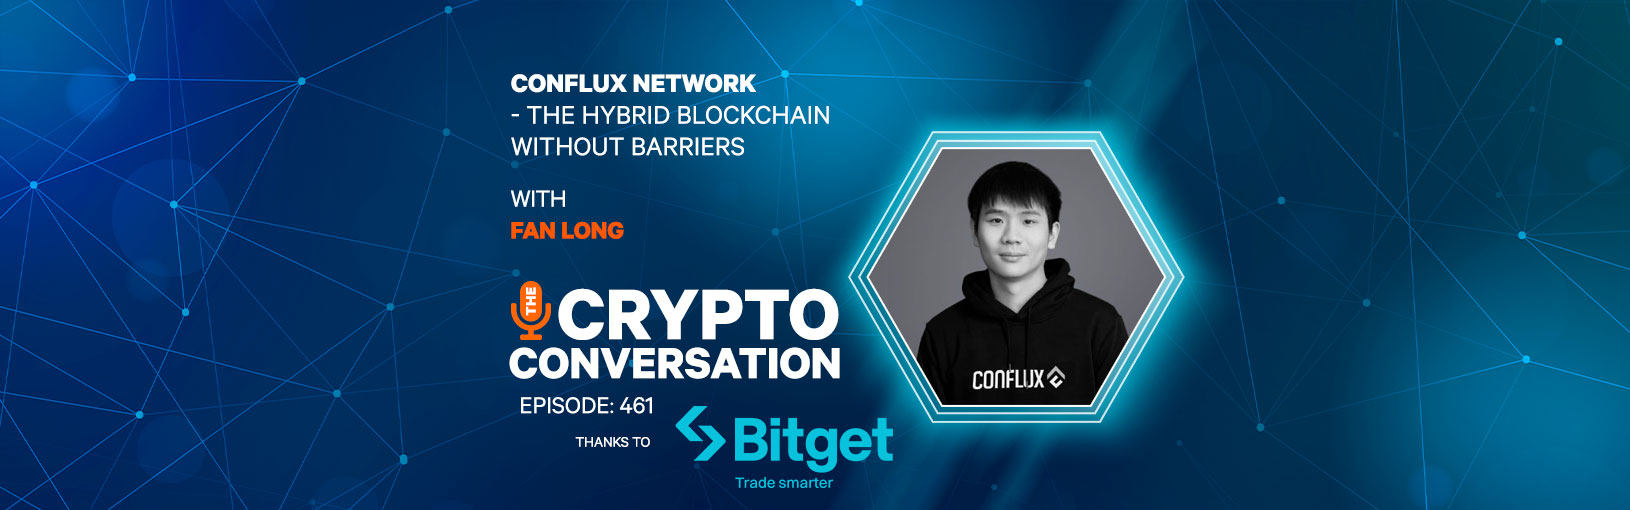 Conflux Network -The Hybrid Blockchain Without Barriers